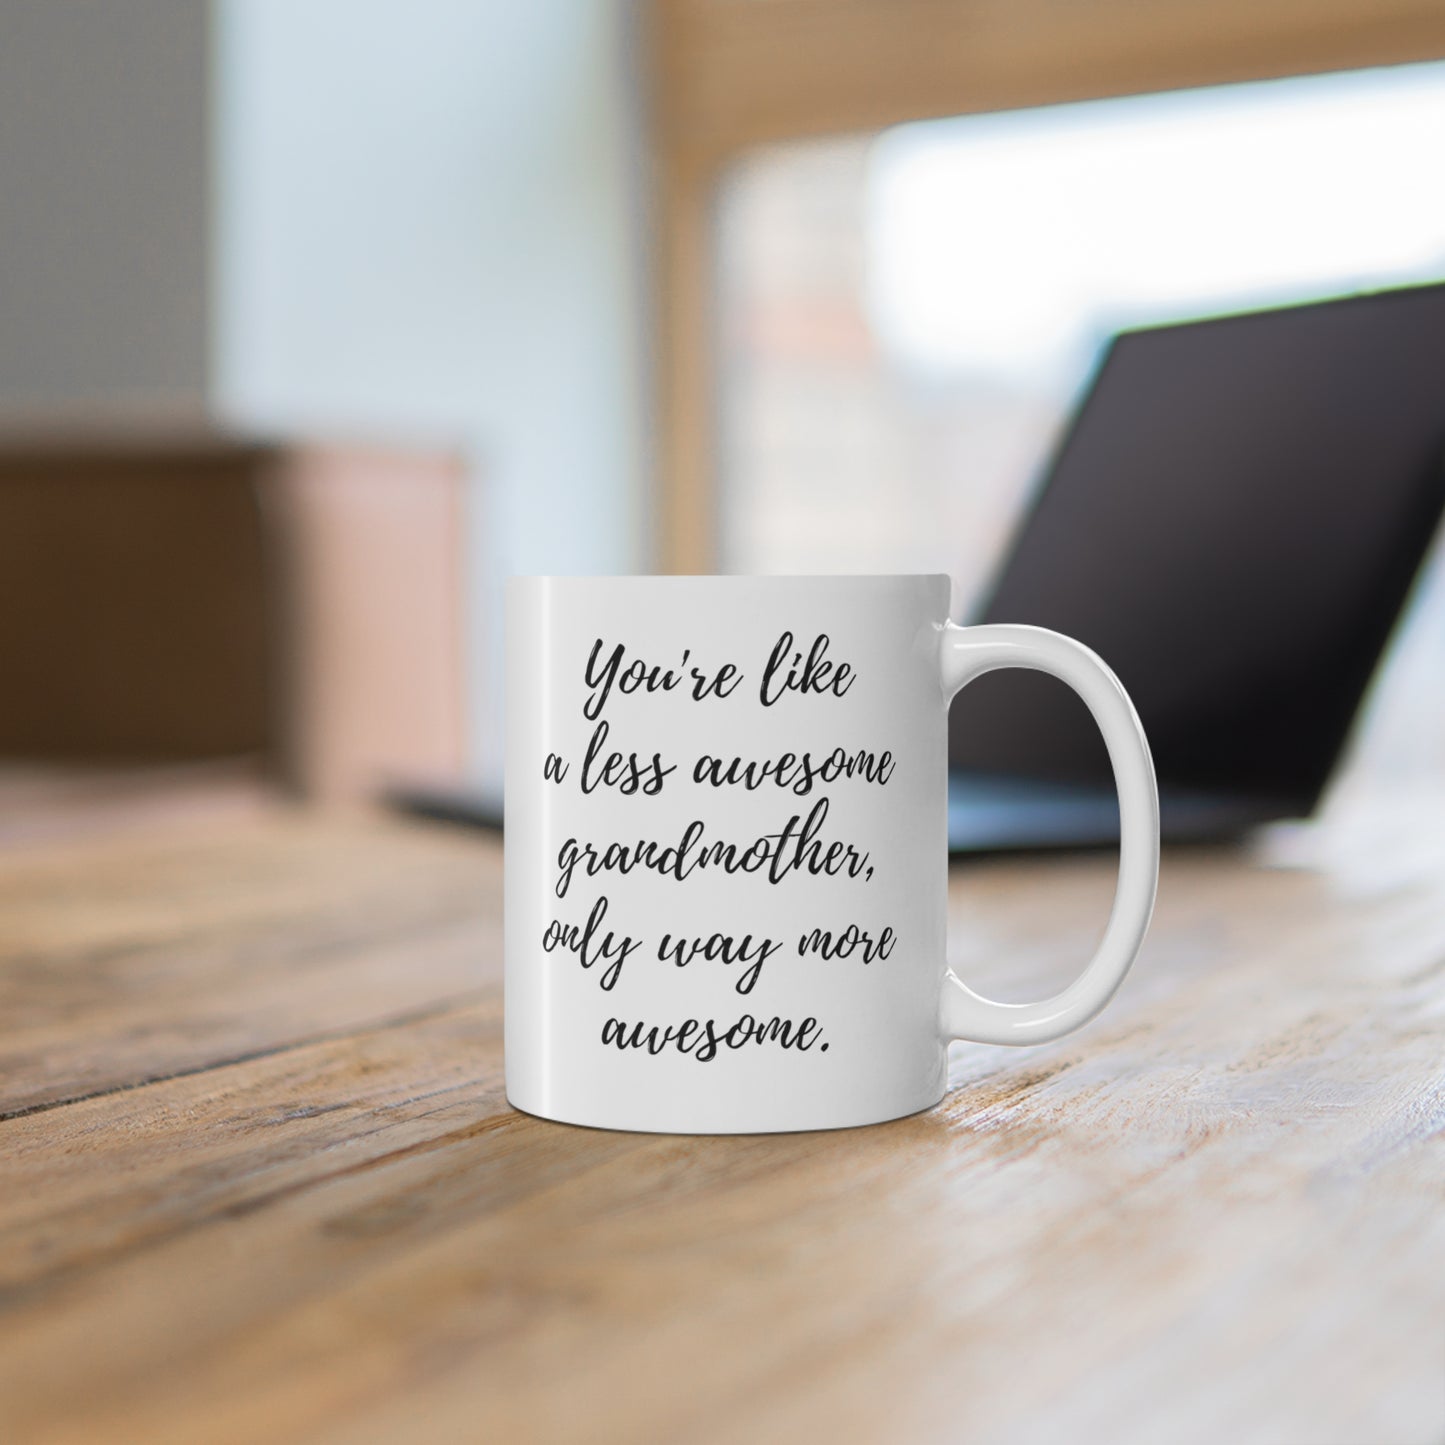 You're Like A Less Awesome Grandmother, Only Way More Awesome | Funny, Snarky Gift | White Ceramic Mug, Script Font